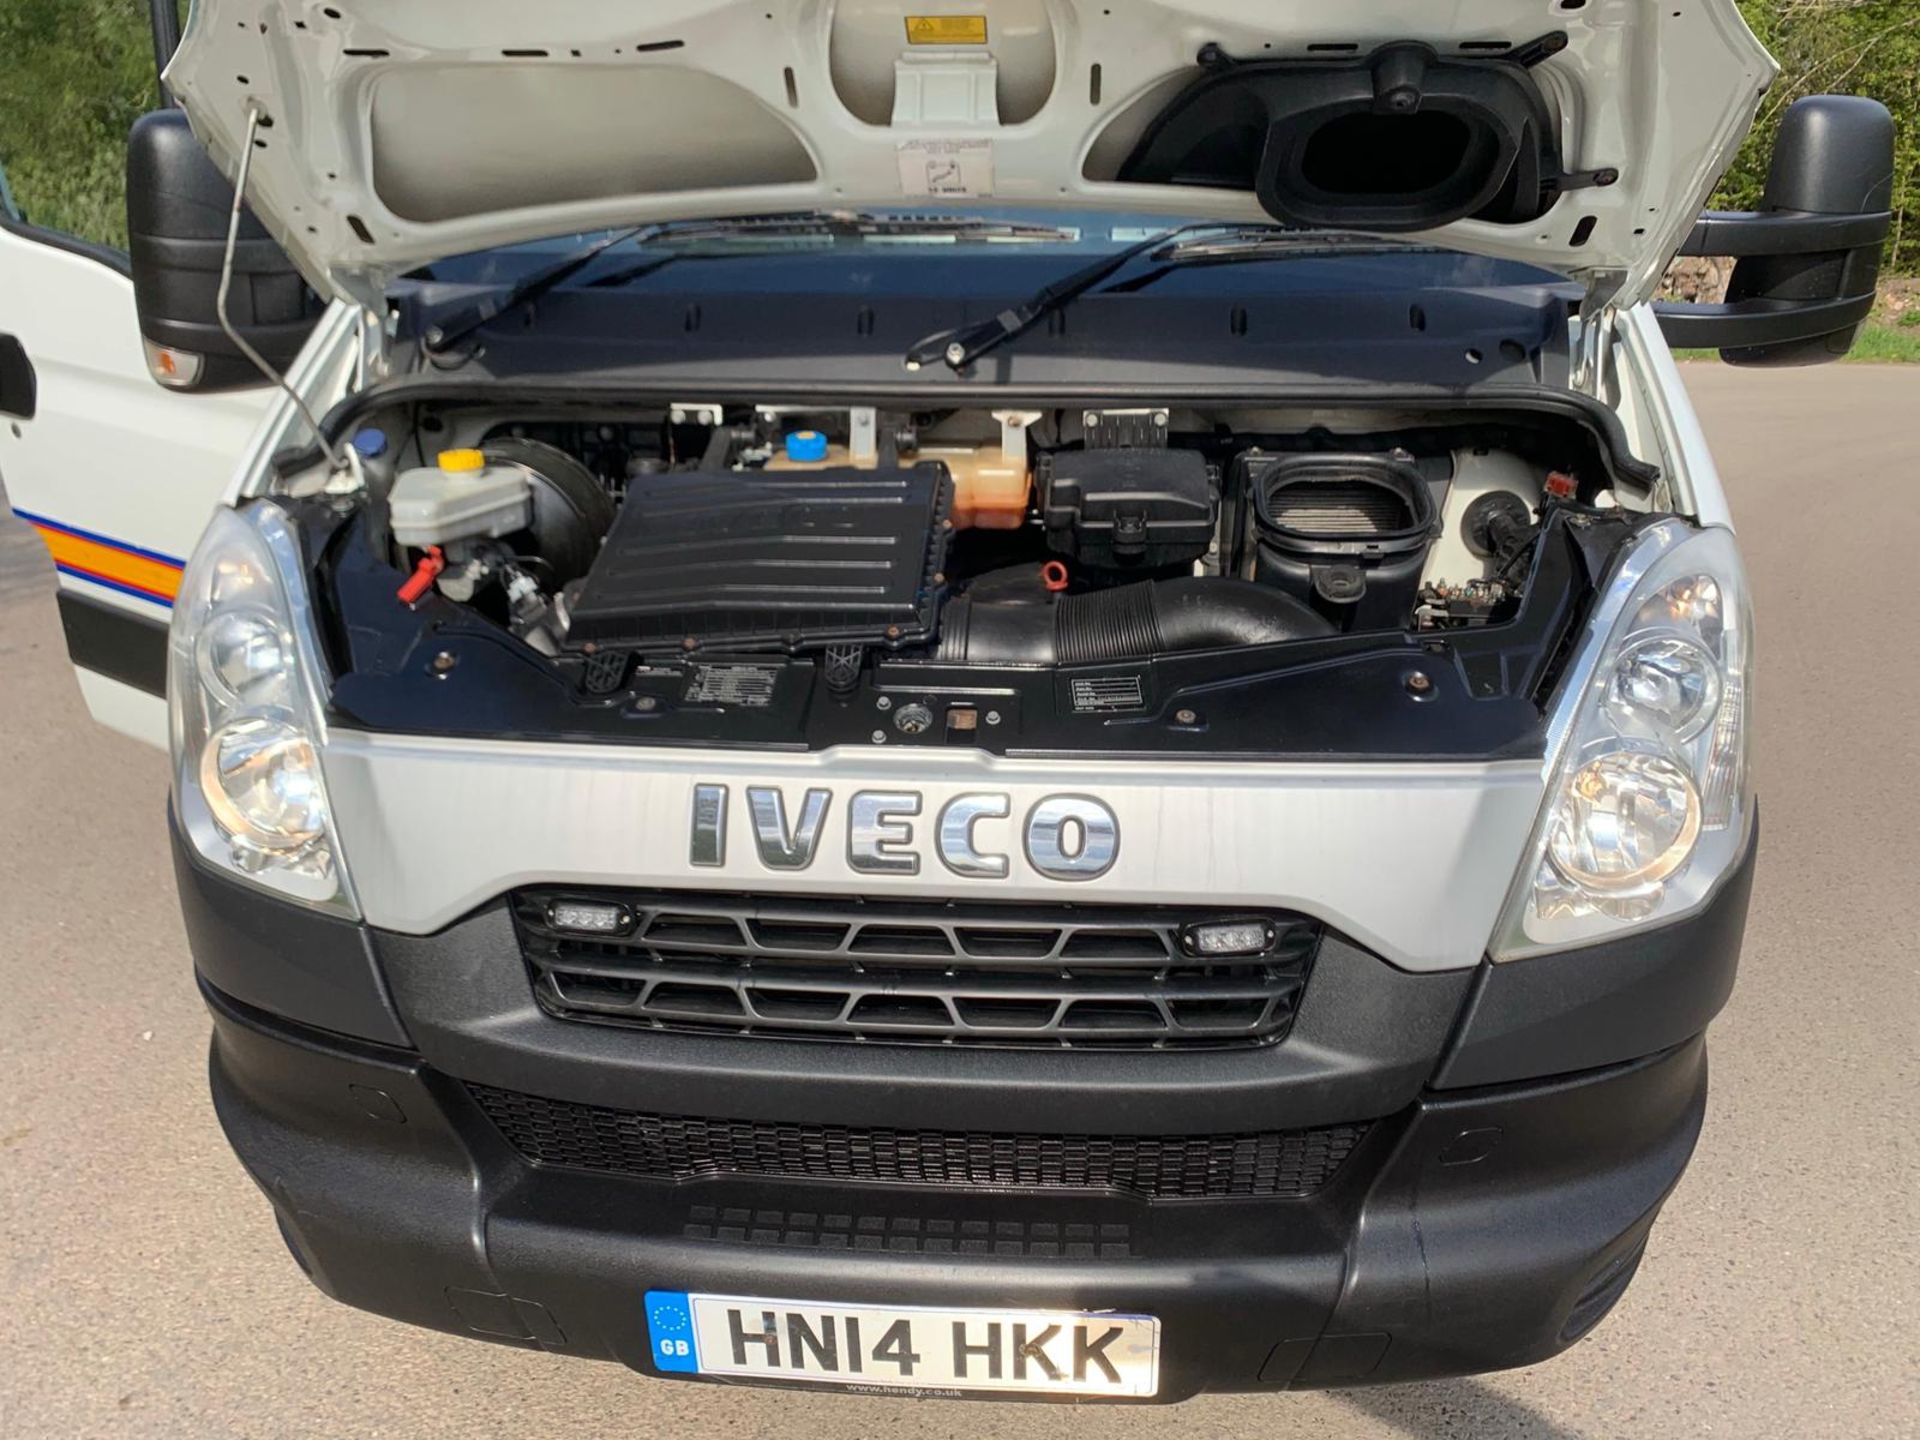 2014 IVECO DAILY 70C17 TILT & SLIDE RECOVERY, 3.0 DIESEL ENGINE, SHOWING 0 PREVIOUS KEEPERS - Image 13 of 20